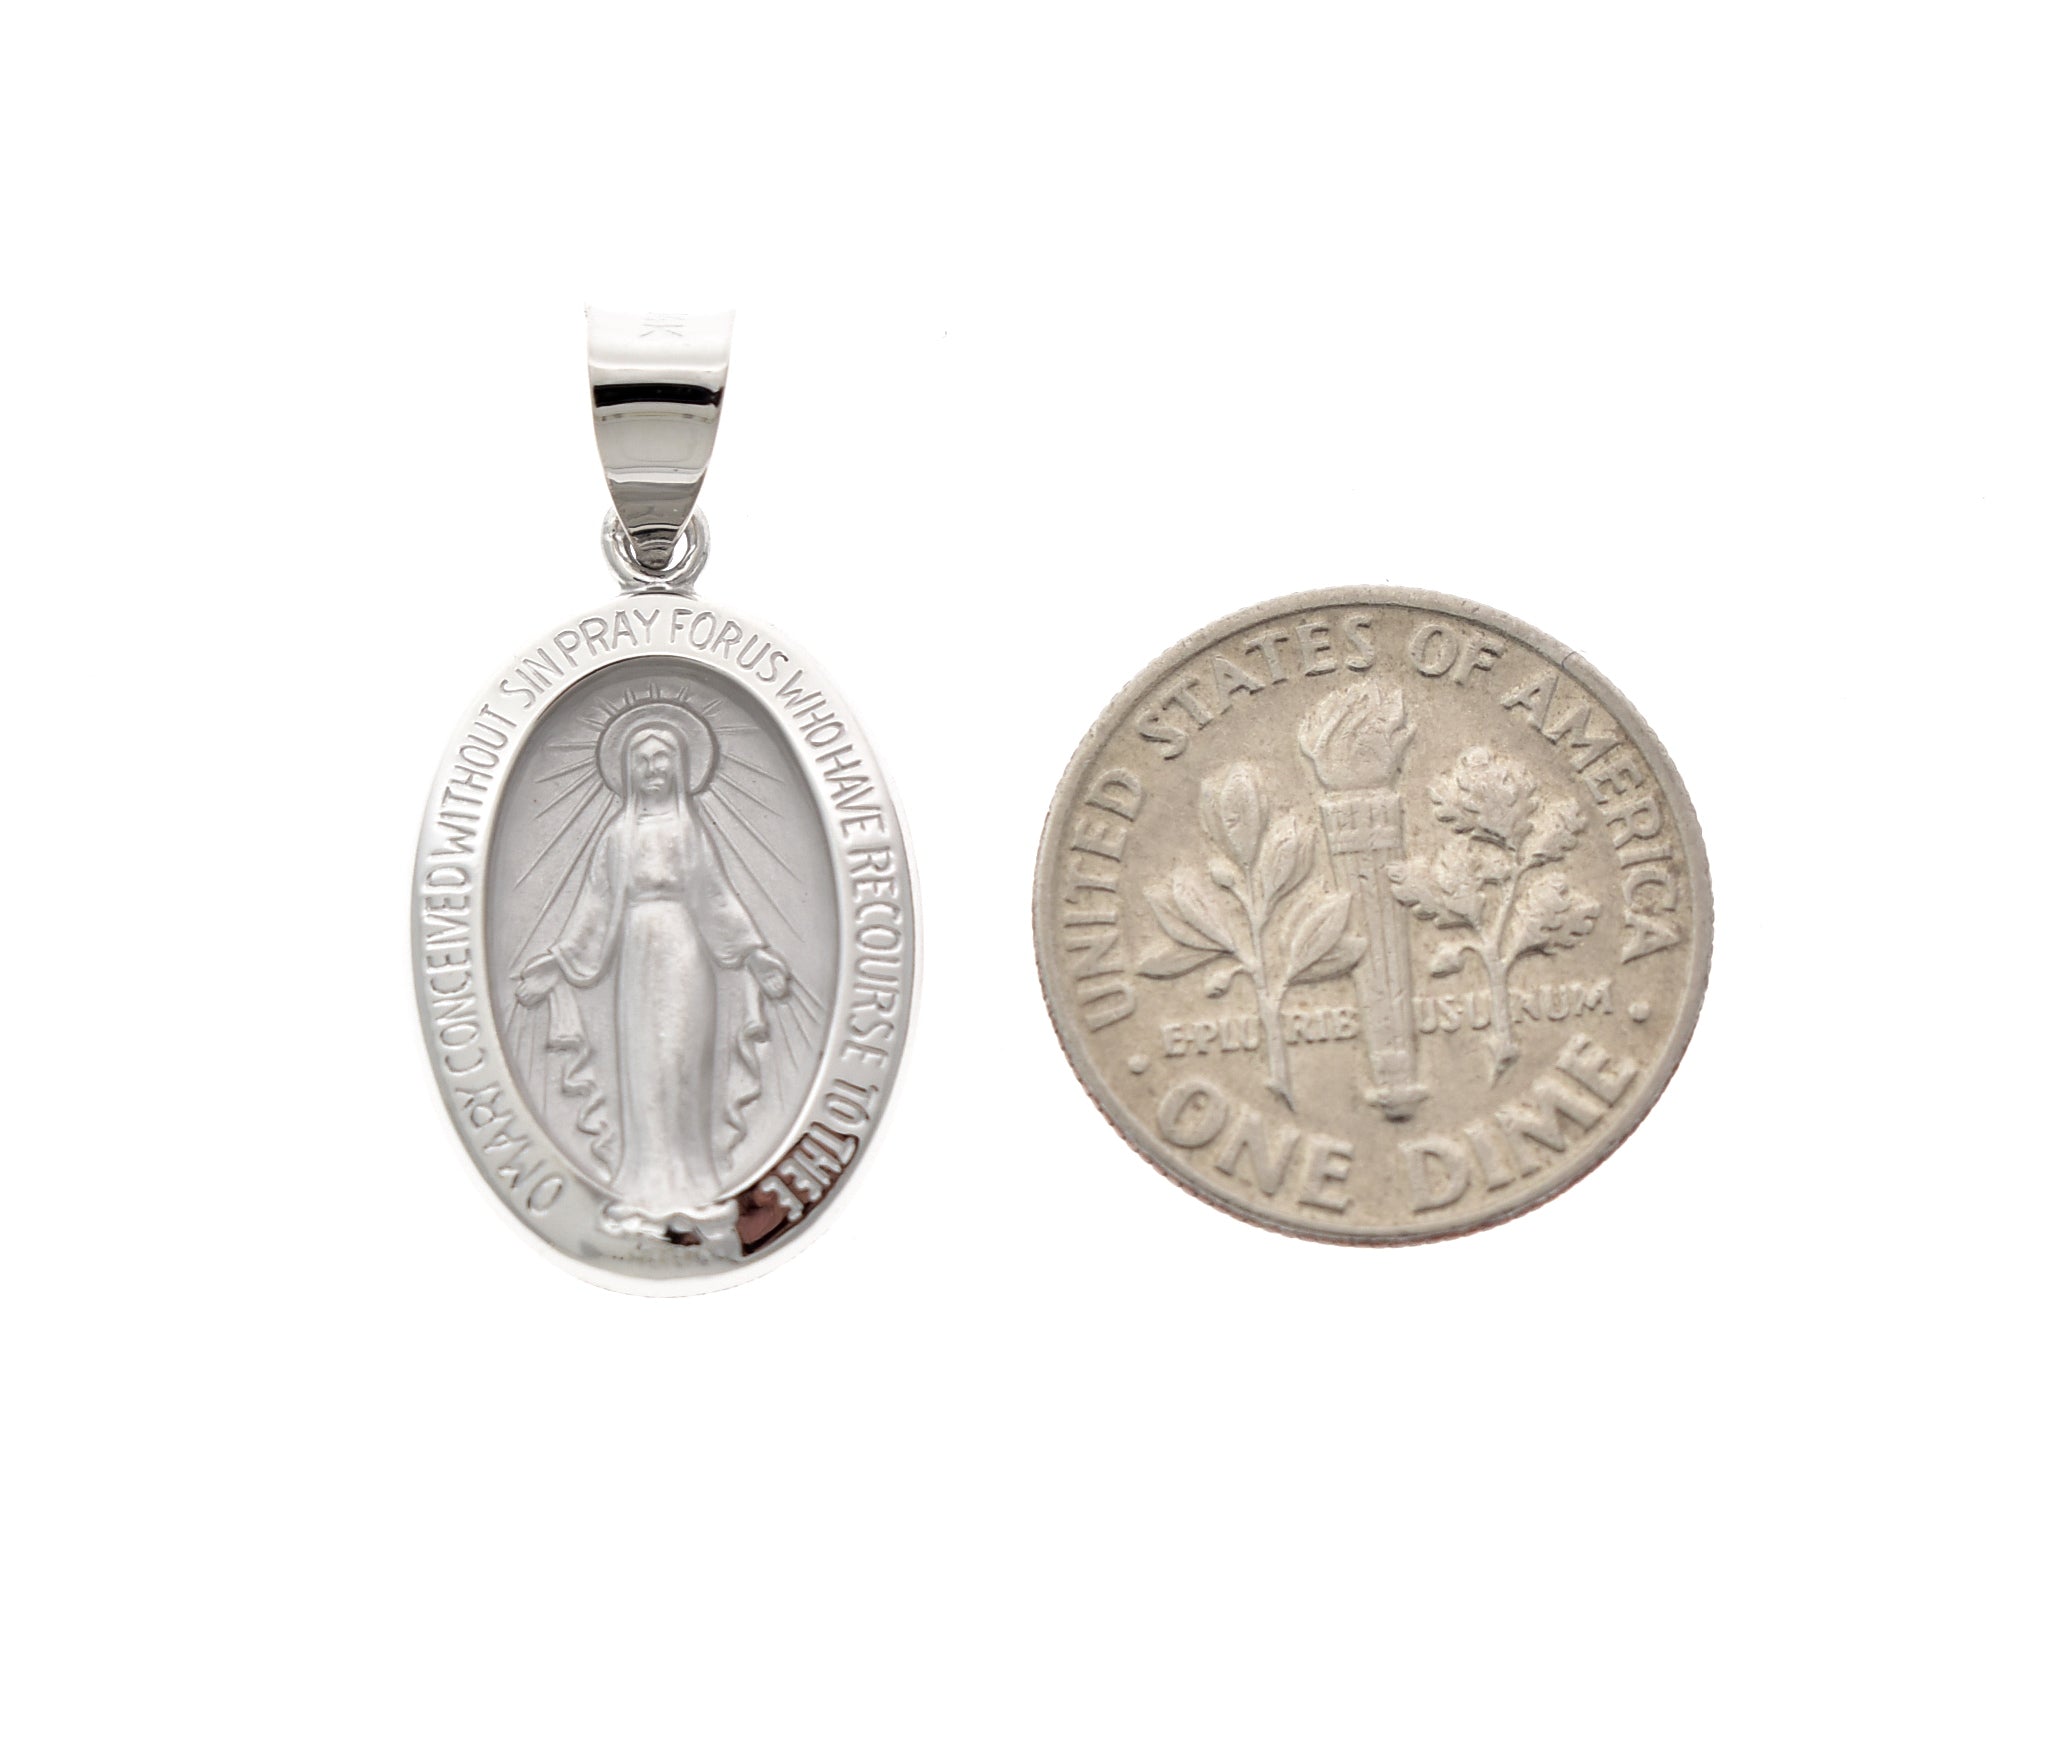 14k White Gold Blessed Virgin Mary Miraculous Medal Oval Hollow Pendant Charm